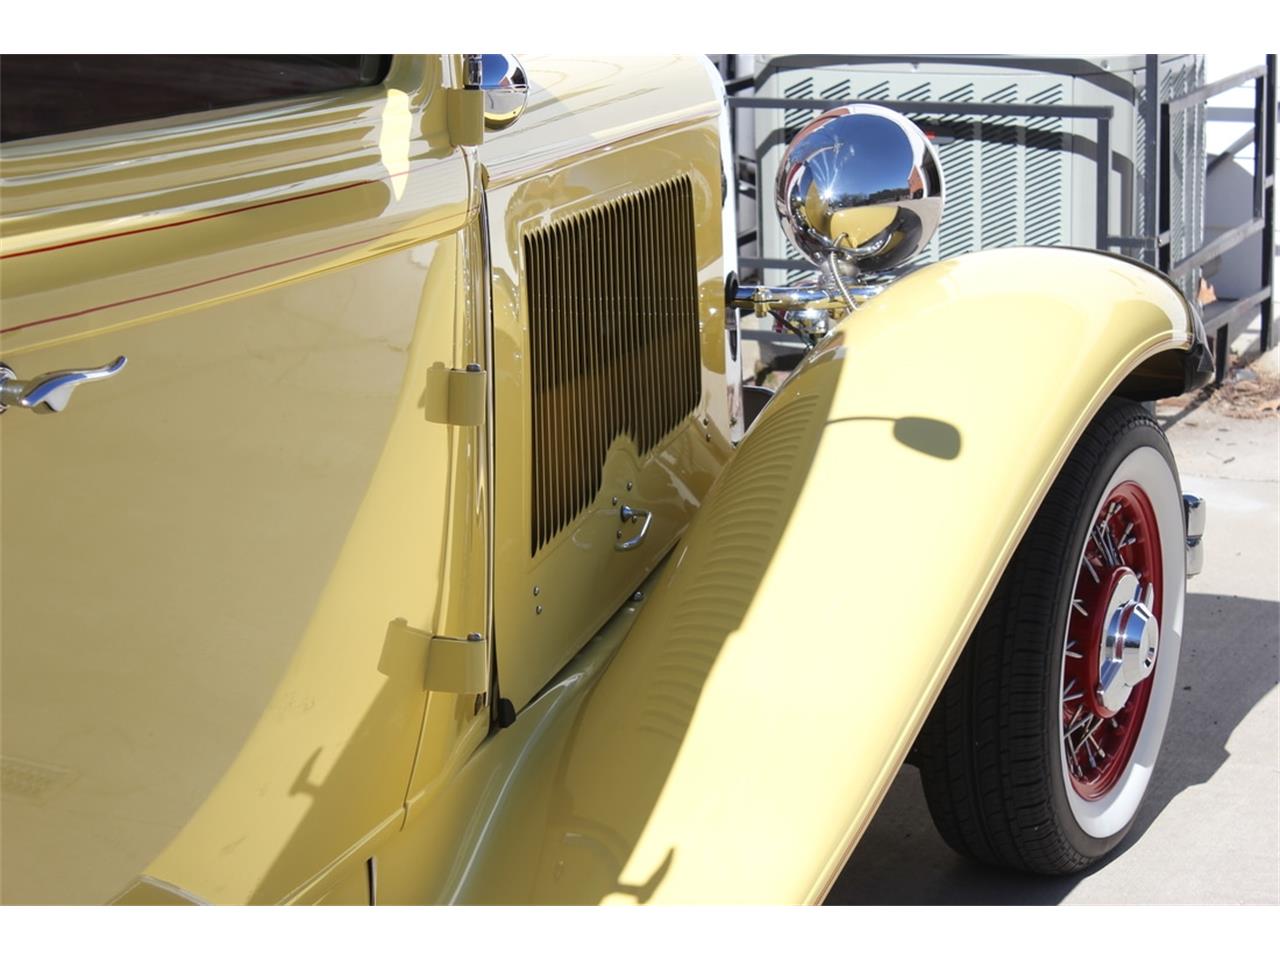 1932 Chrysler Coupe for Sale | 0 | CC-1034994